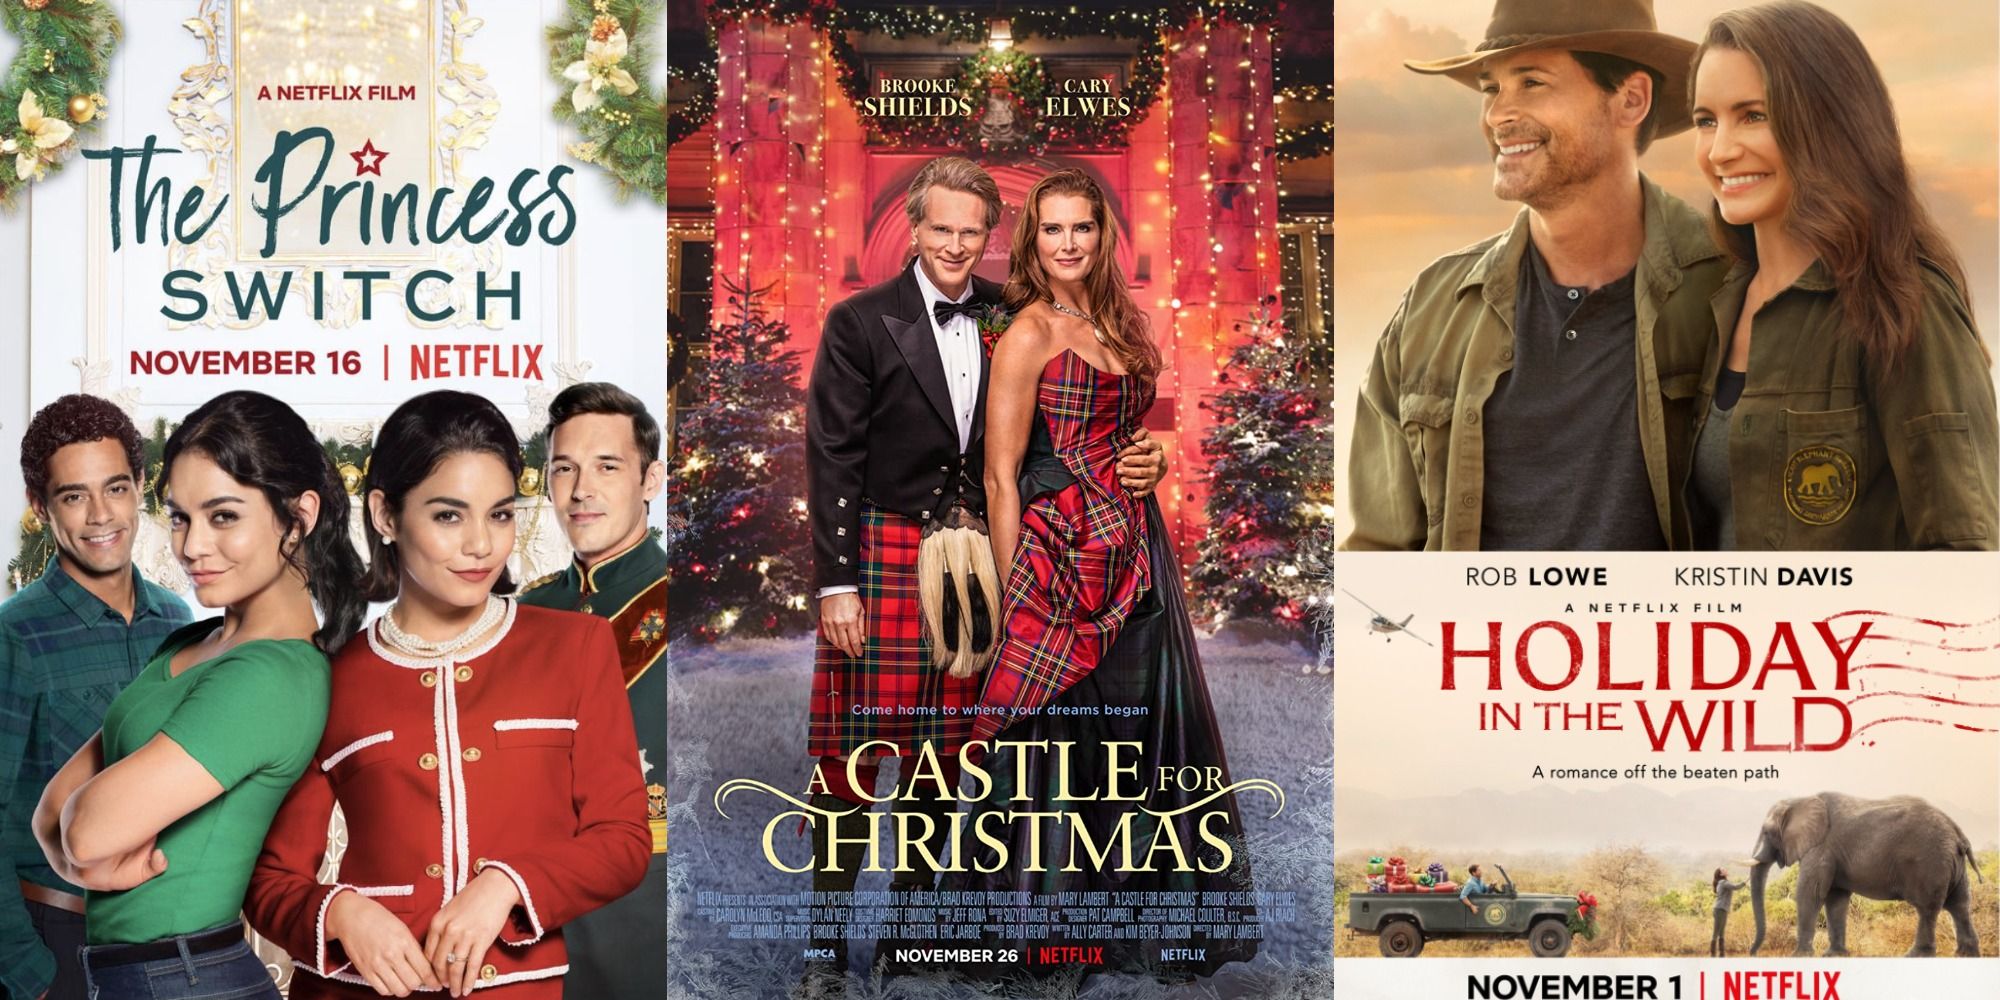 Poster for The Princess Switch, A Castle For Christmas, and Holiday in the Wild all on Netflix